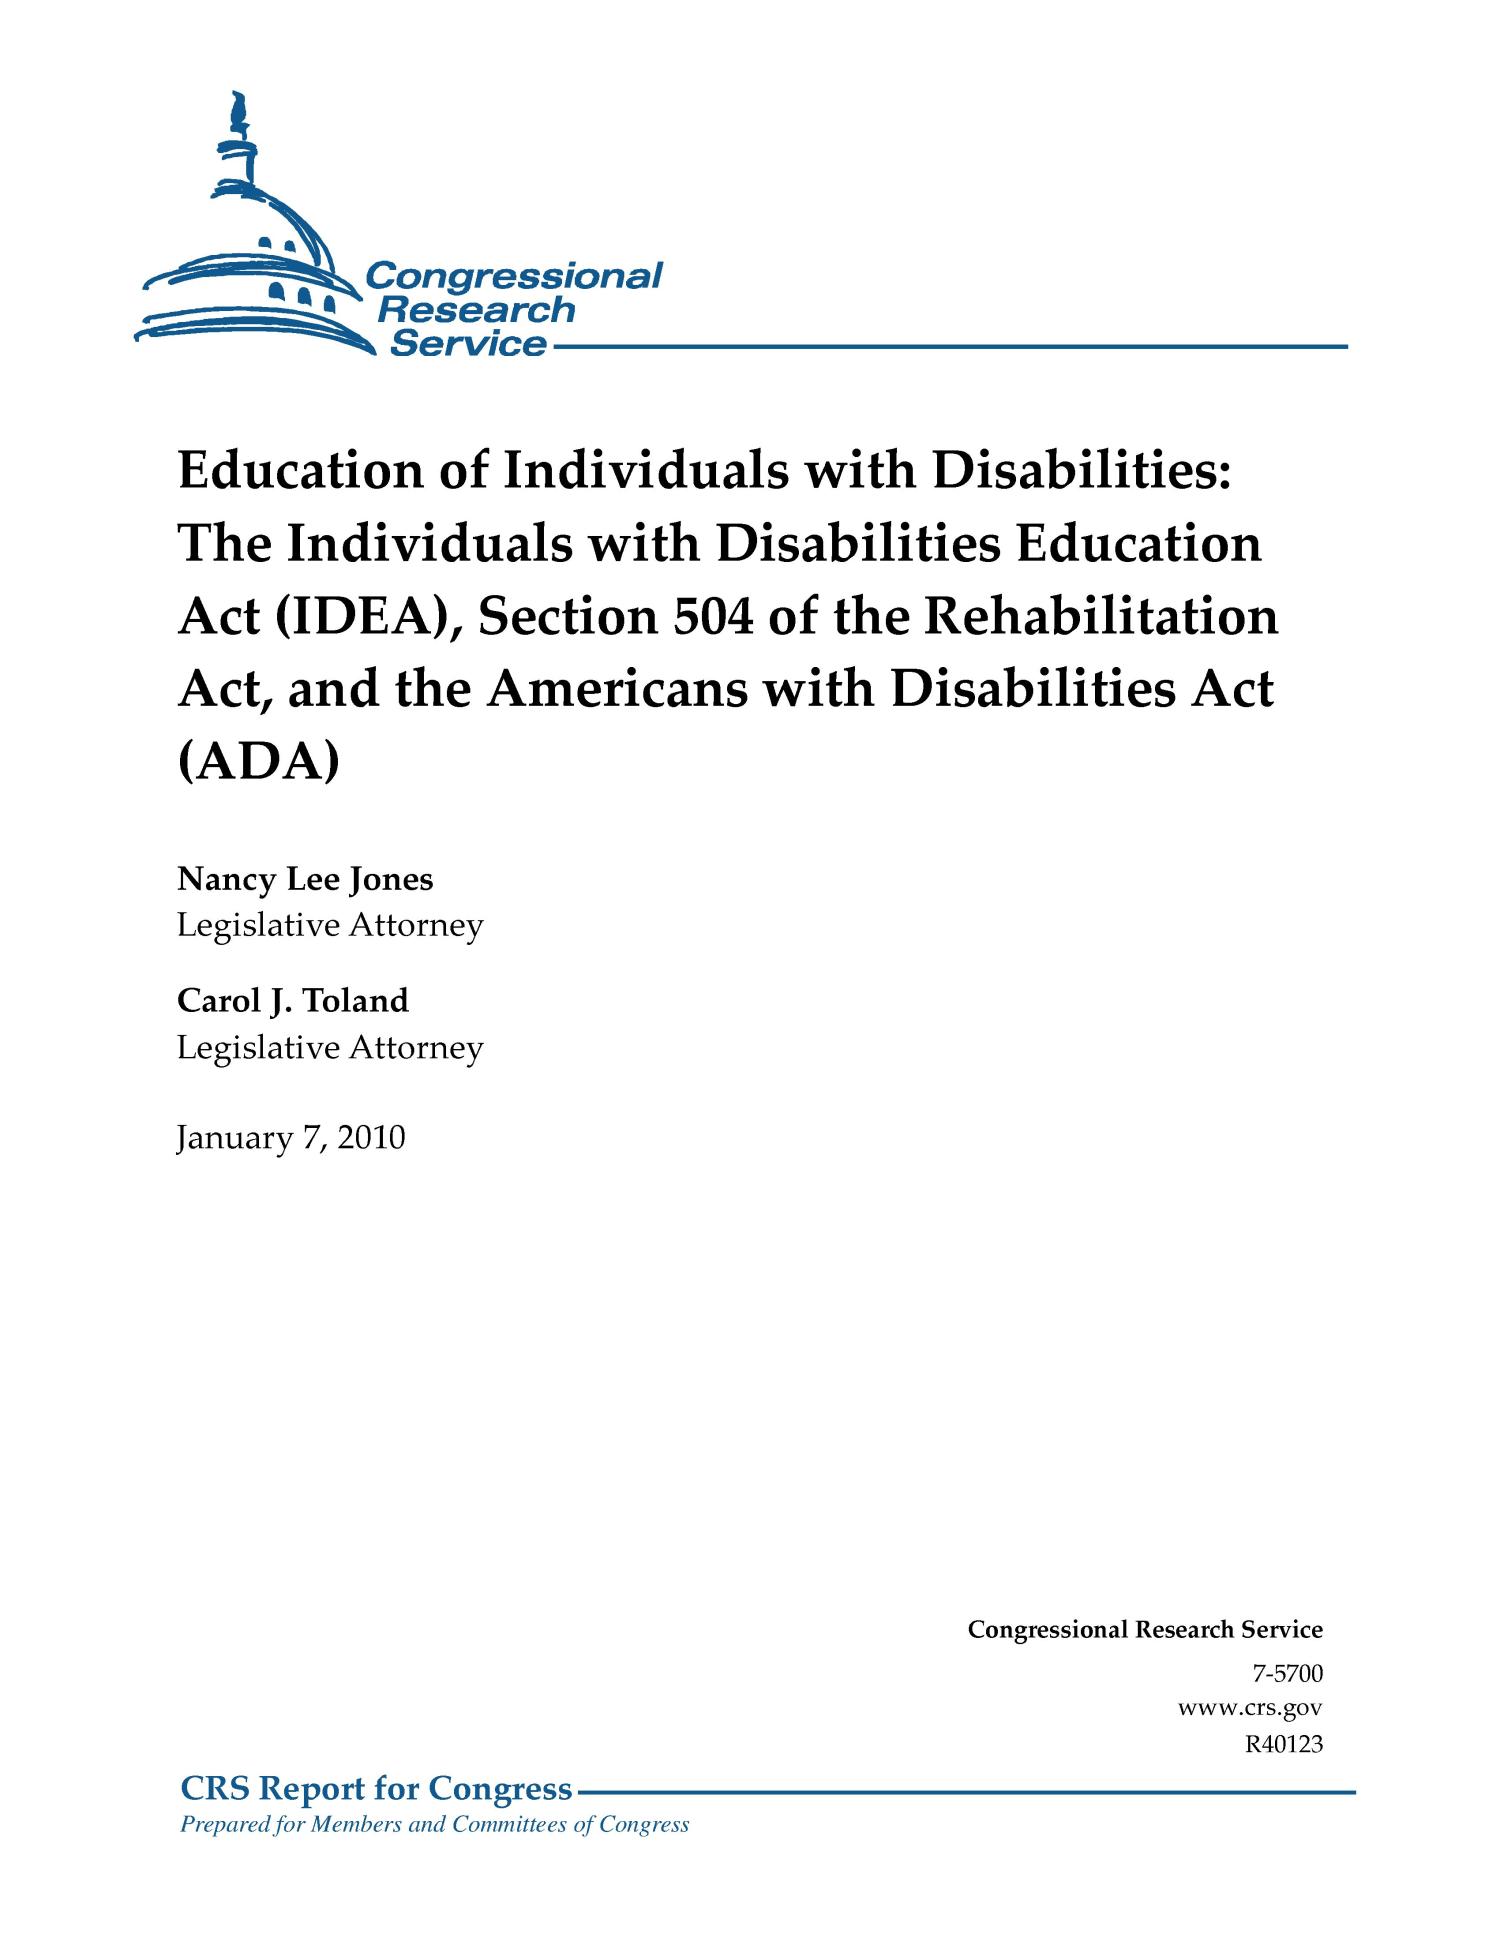 Education of Individuals with Disabilities: The Individuals with Disabilities Education Act (IDEA), Section 504 of the Rehabilitation Act, and the Americans with Disabilities Act (ADA)
                                                
                                                    [Sequence #]: 1 of 17
                                                